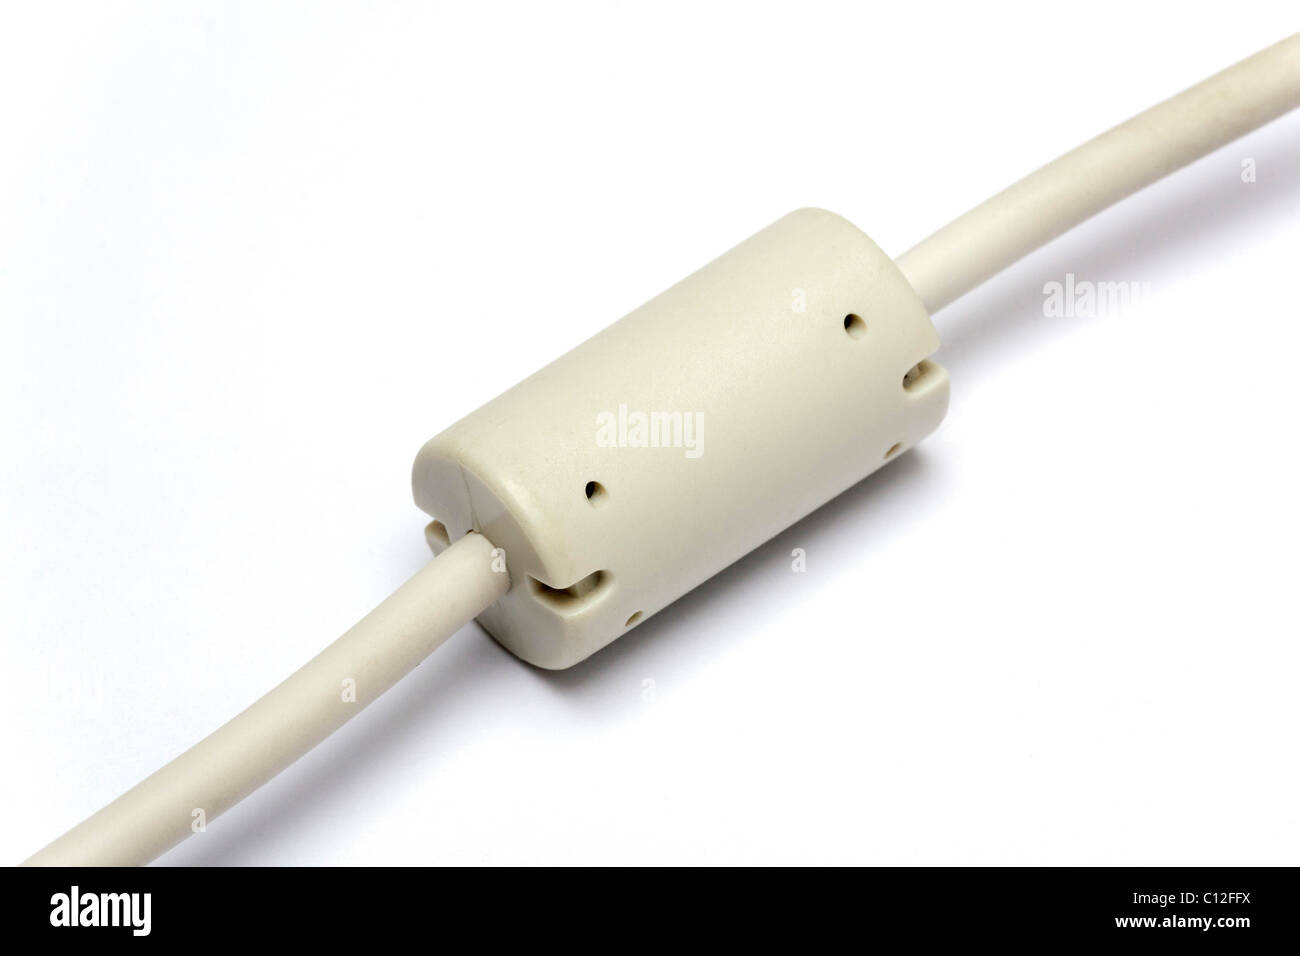 ferrite core interference filter on a cable Stock Photo